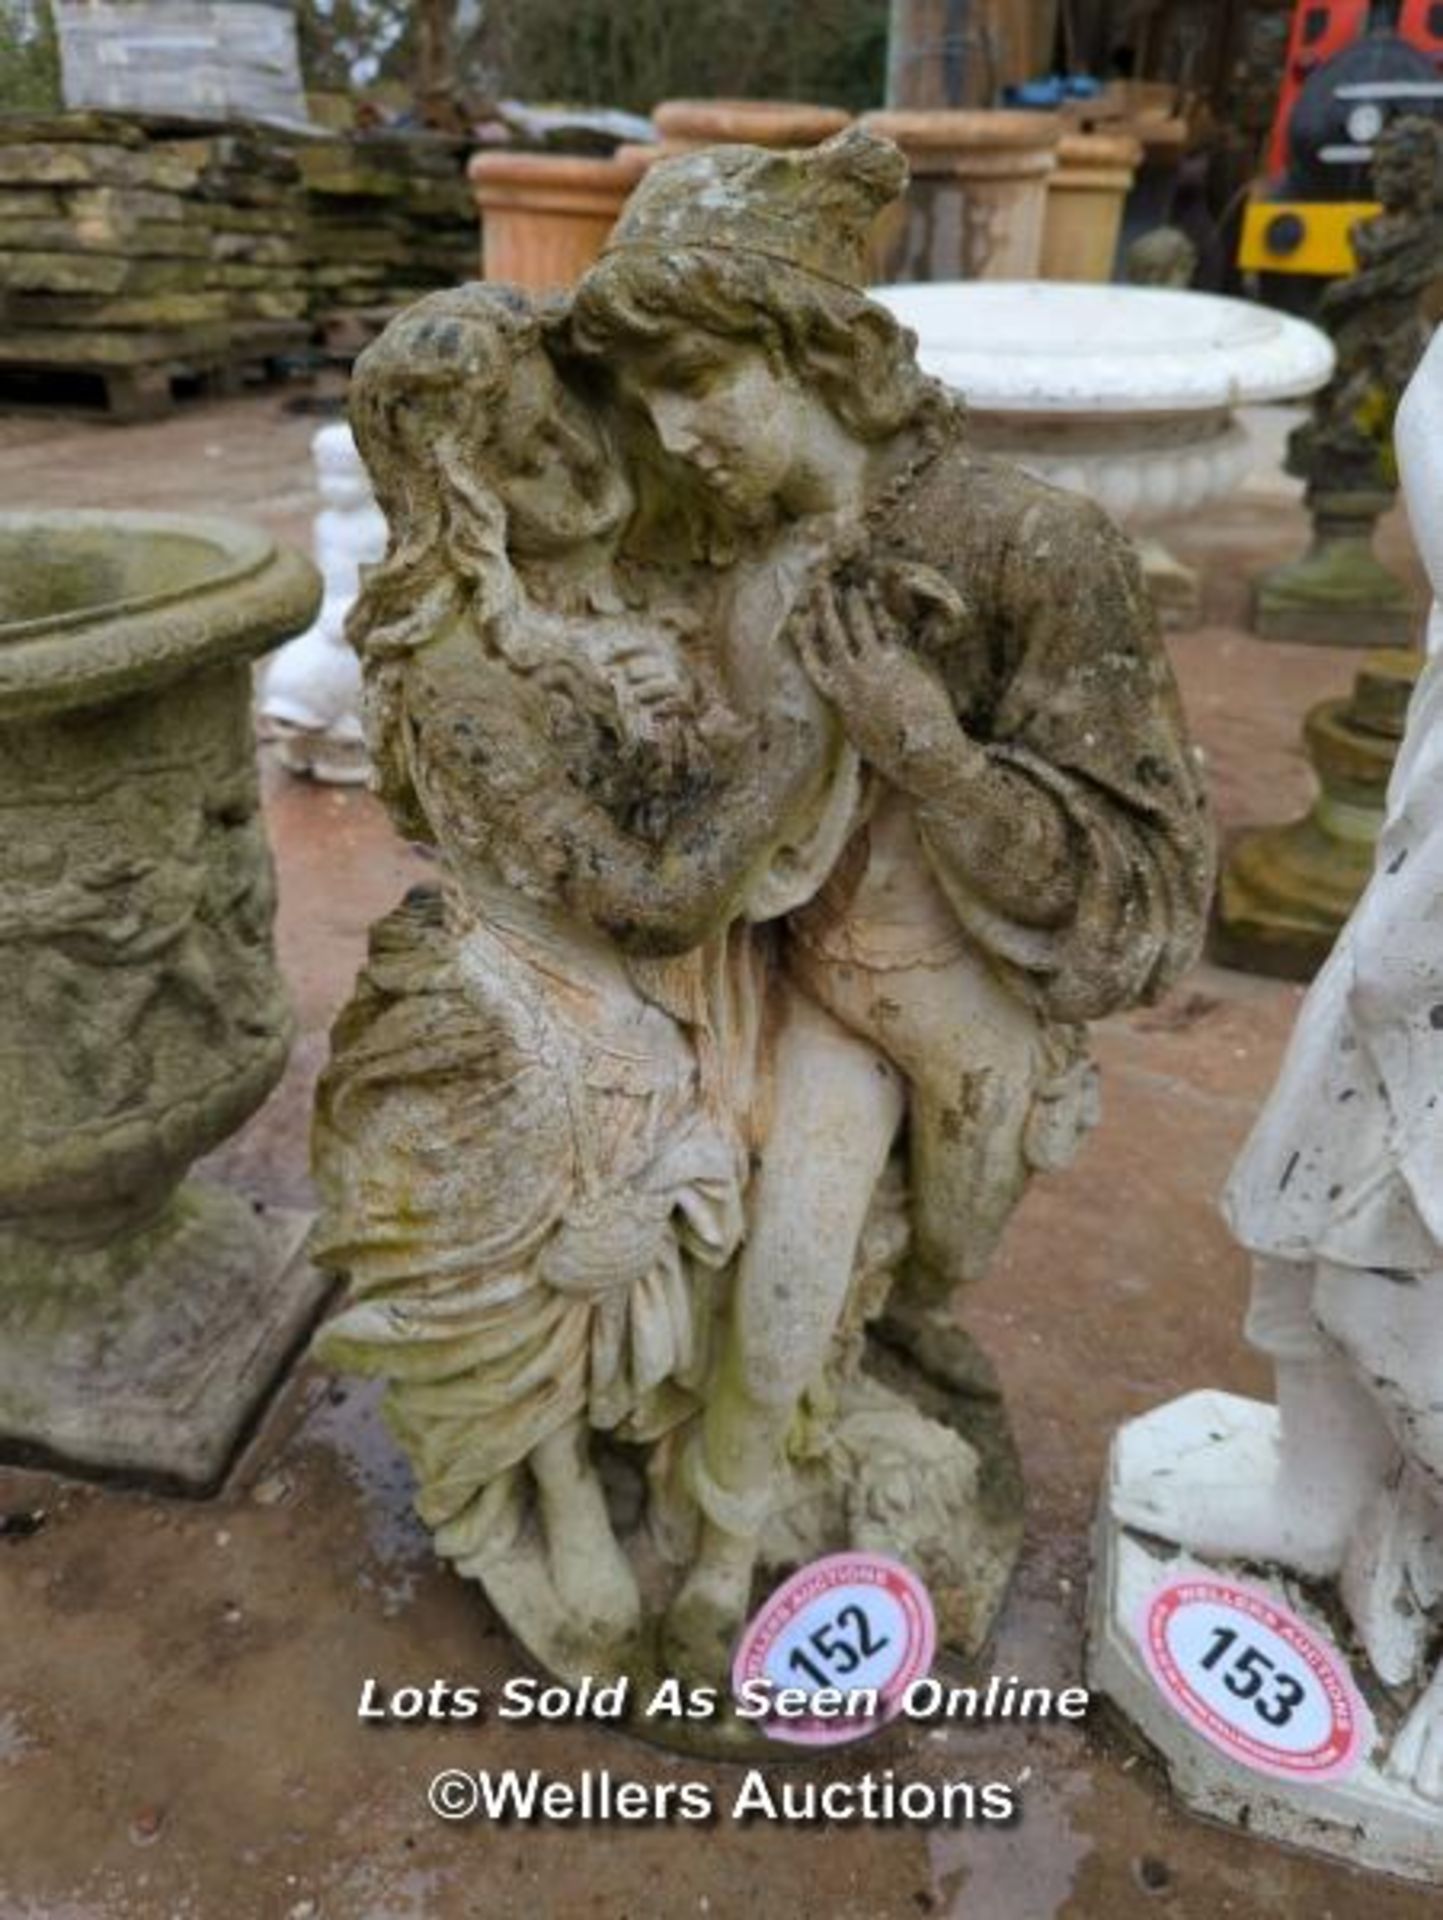 *CONCRETE STATUE OF A COUPLE, 27INCHES HIGH (DAMAGED BASE) / ALL LOTS ARE LOCATED AT AUTHENTIC